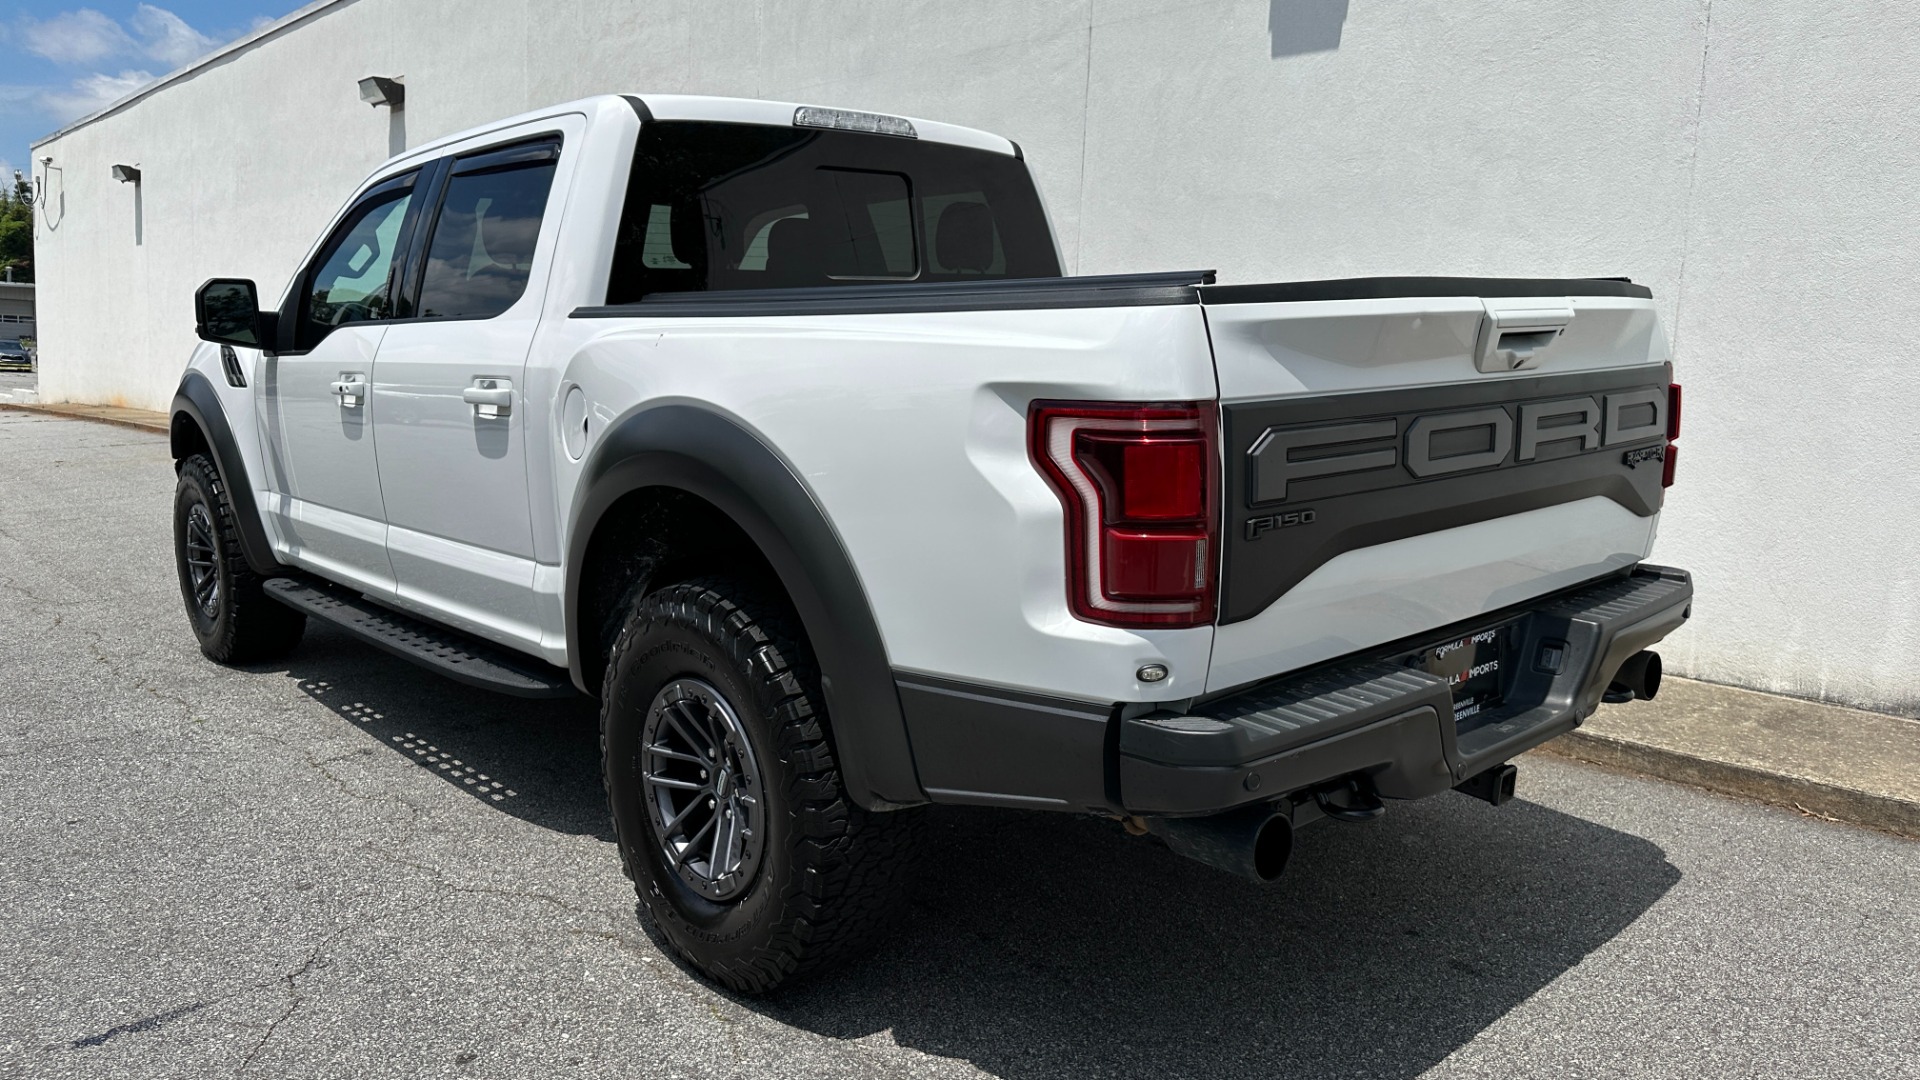 Used 2020 Ford F-150 RAPTOR / HIGH OUTPUT / PANORAMIC ROOF / 17IN FORGED WHEELS for sale $59,995 at Formula Imports in Charlotte NC 28227 4